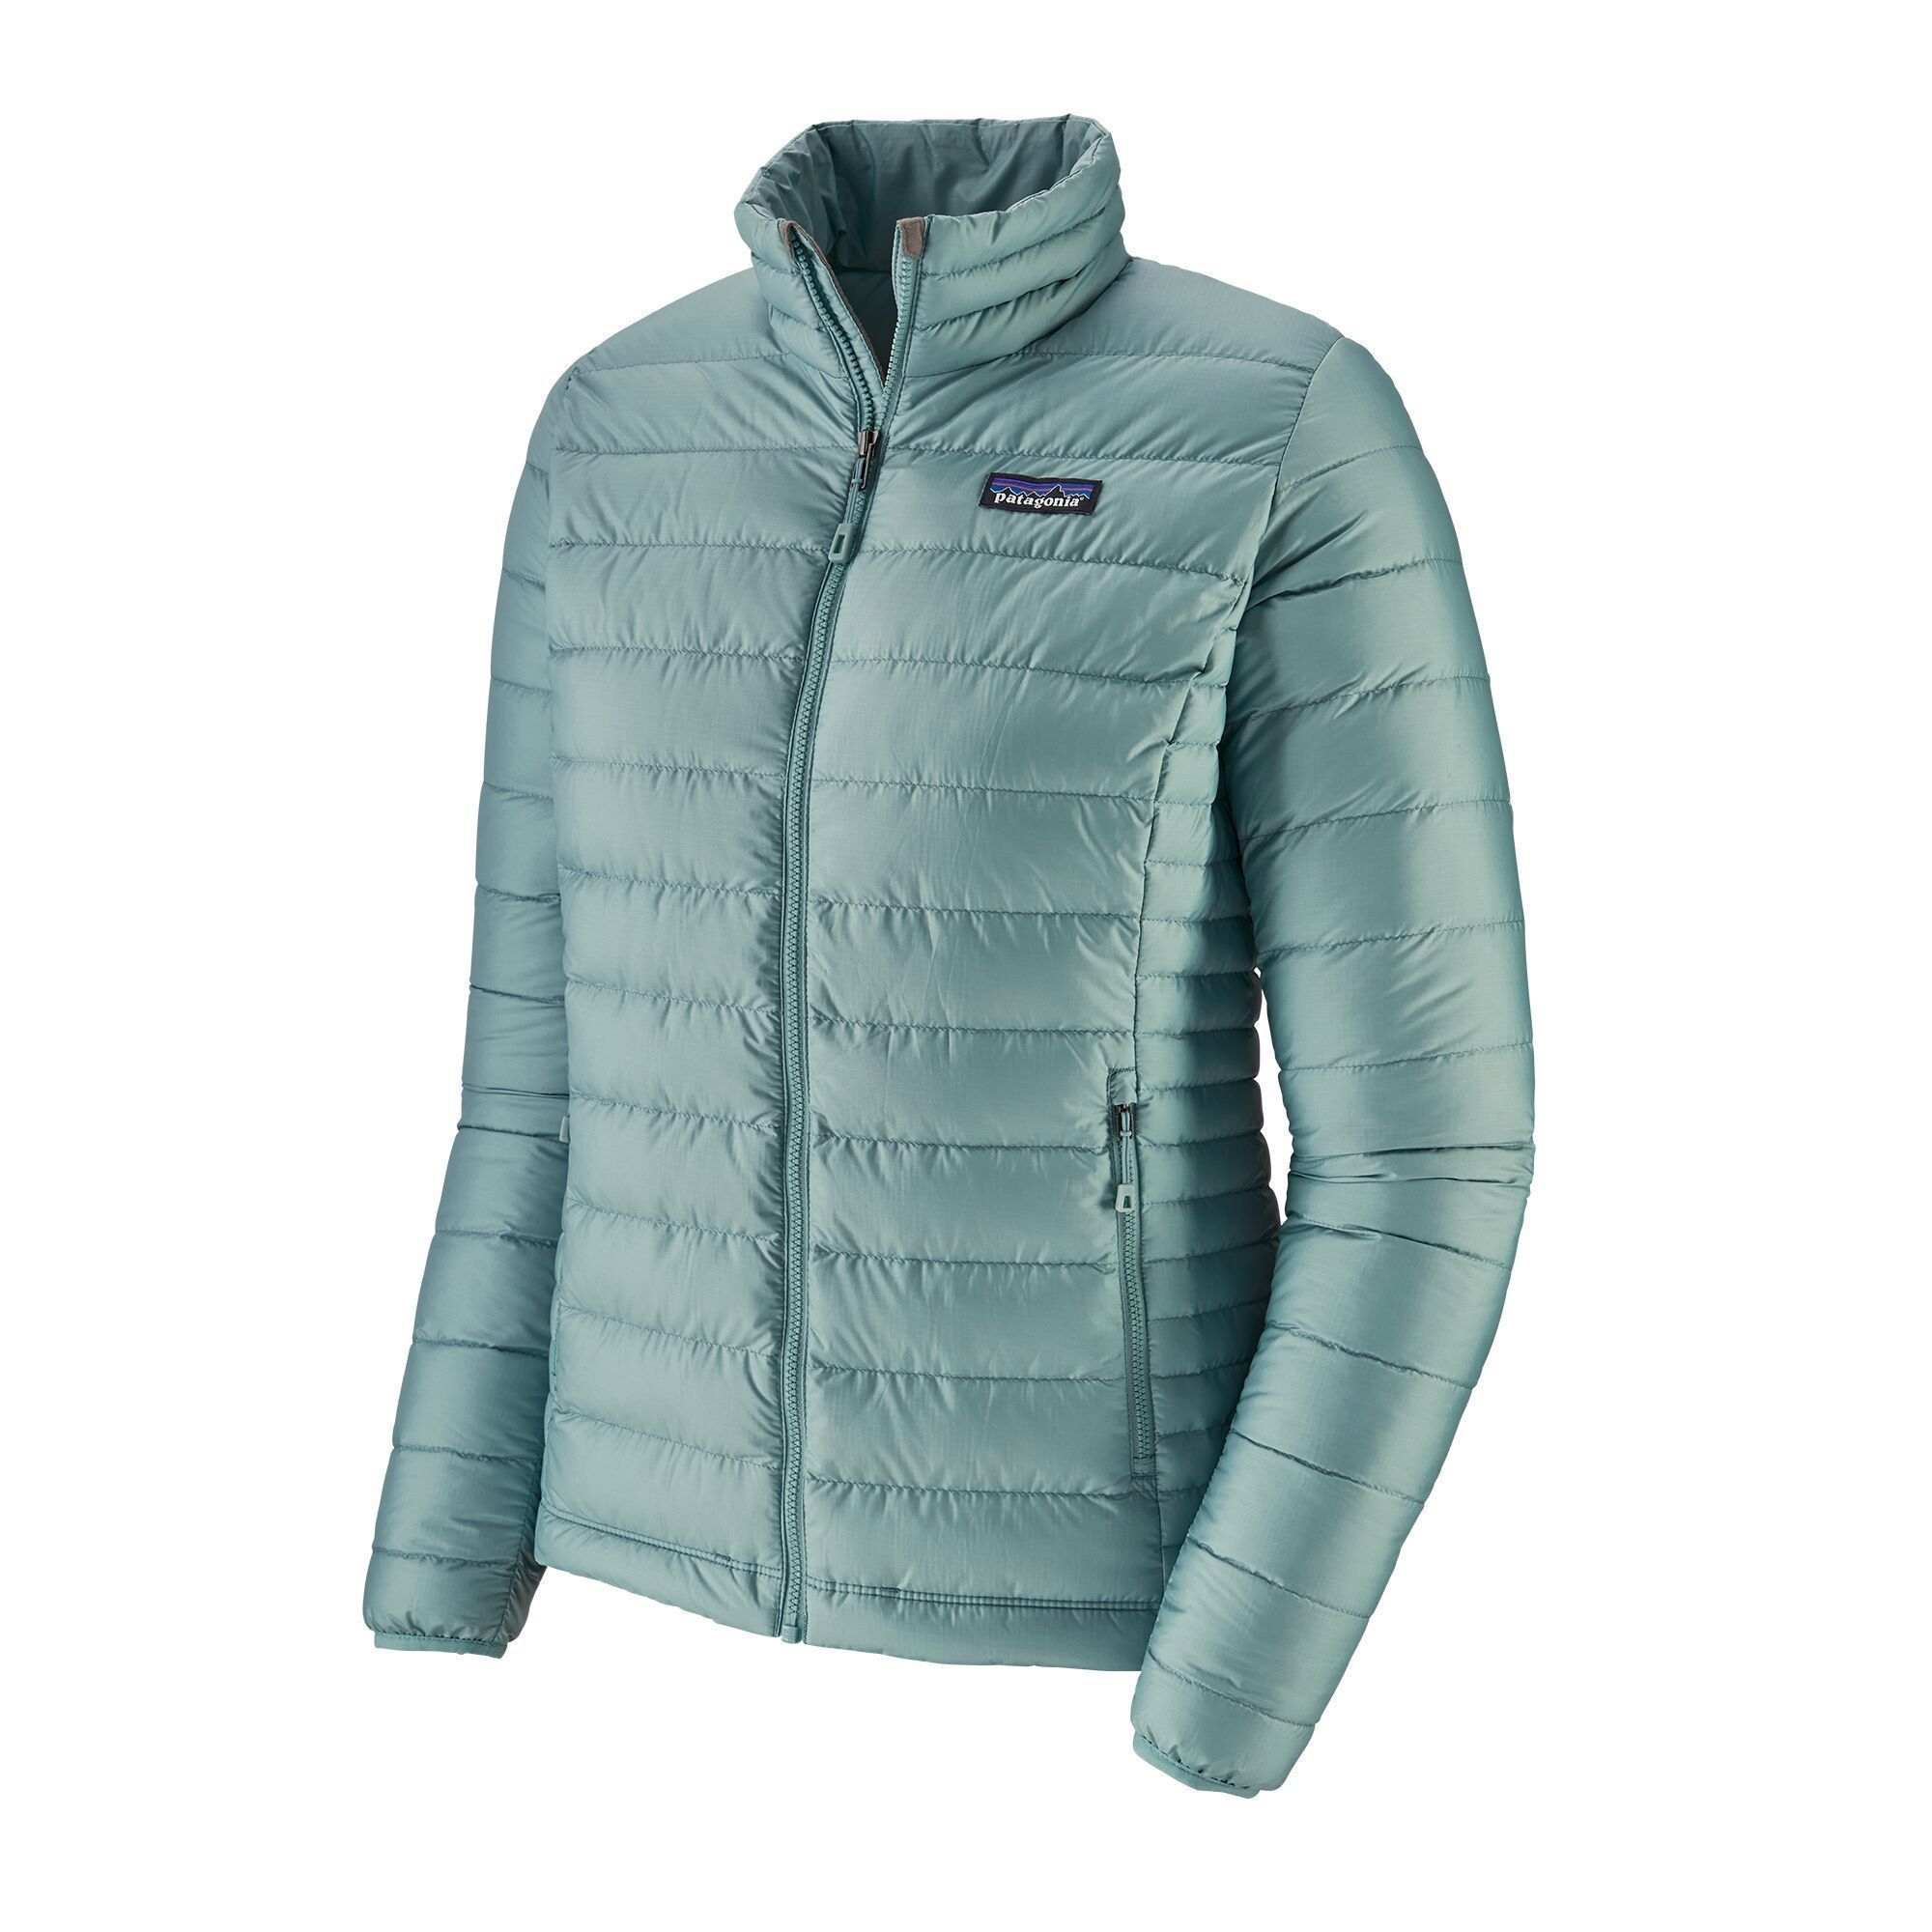 Patagonia Women's Down Sweater Jacket - Sustainable Down, Big Sky Blue / S